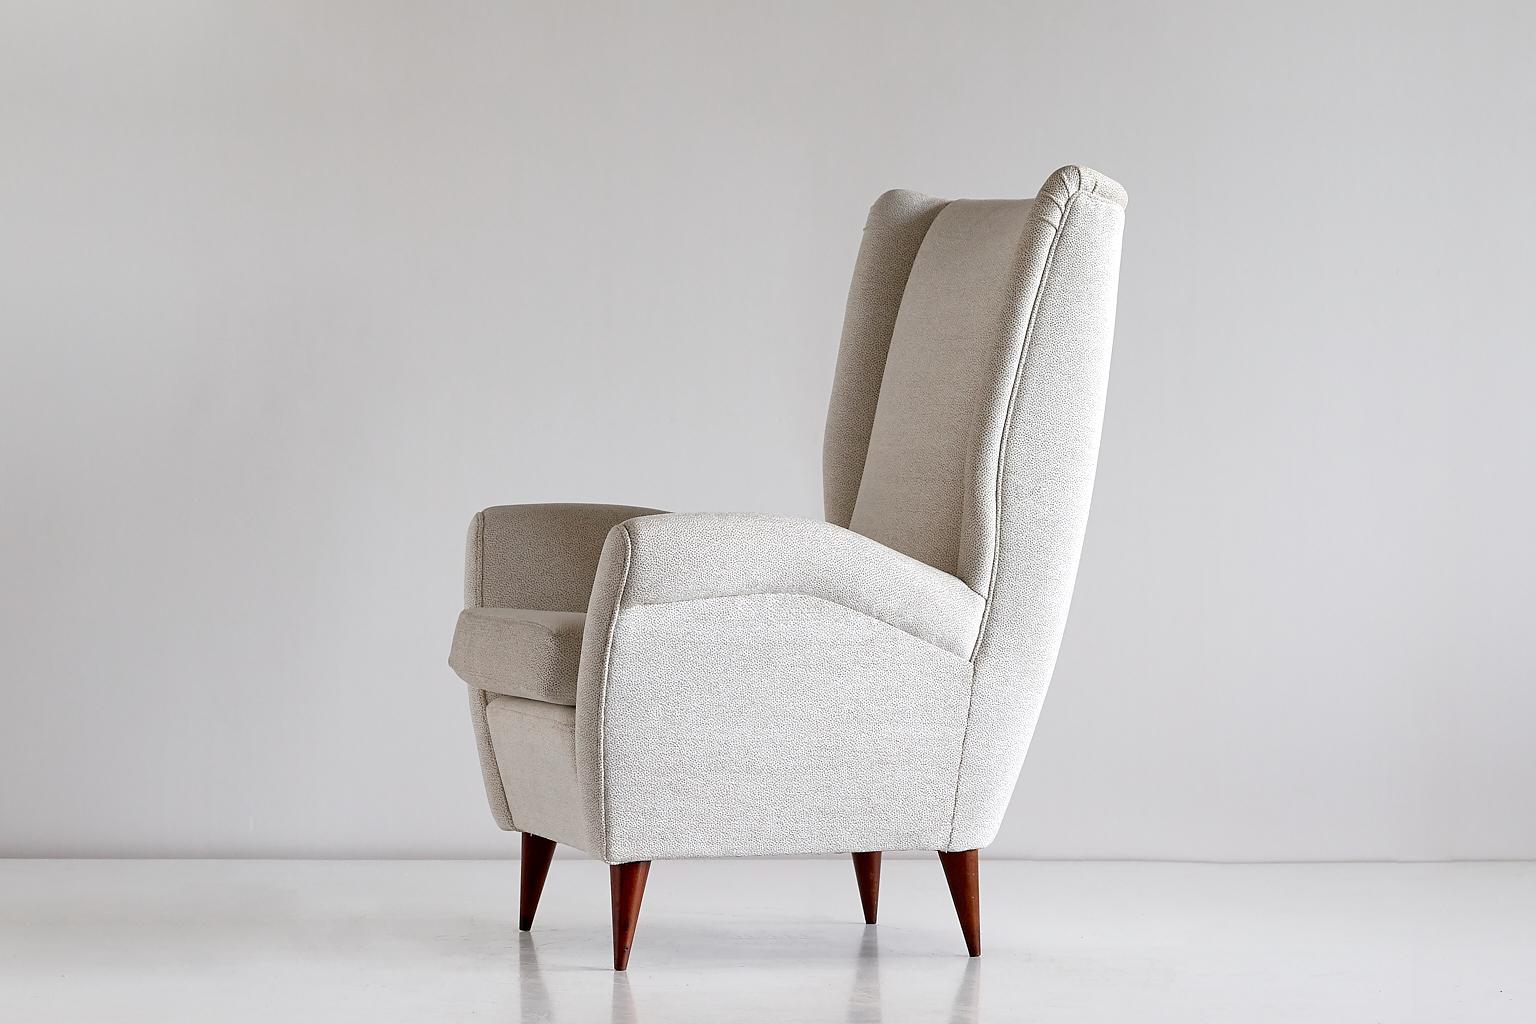 Mid-20th Century Gio Ponti High Back Armchair in Ivory Chenille and Walnut, Italy, Late 1940s